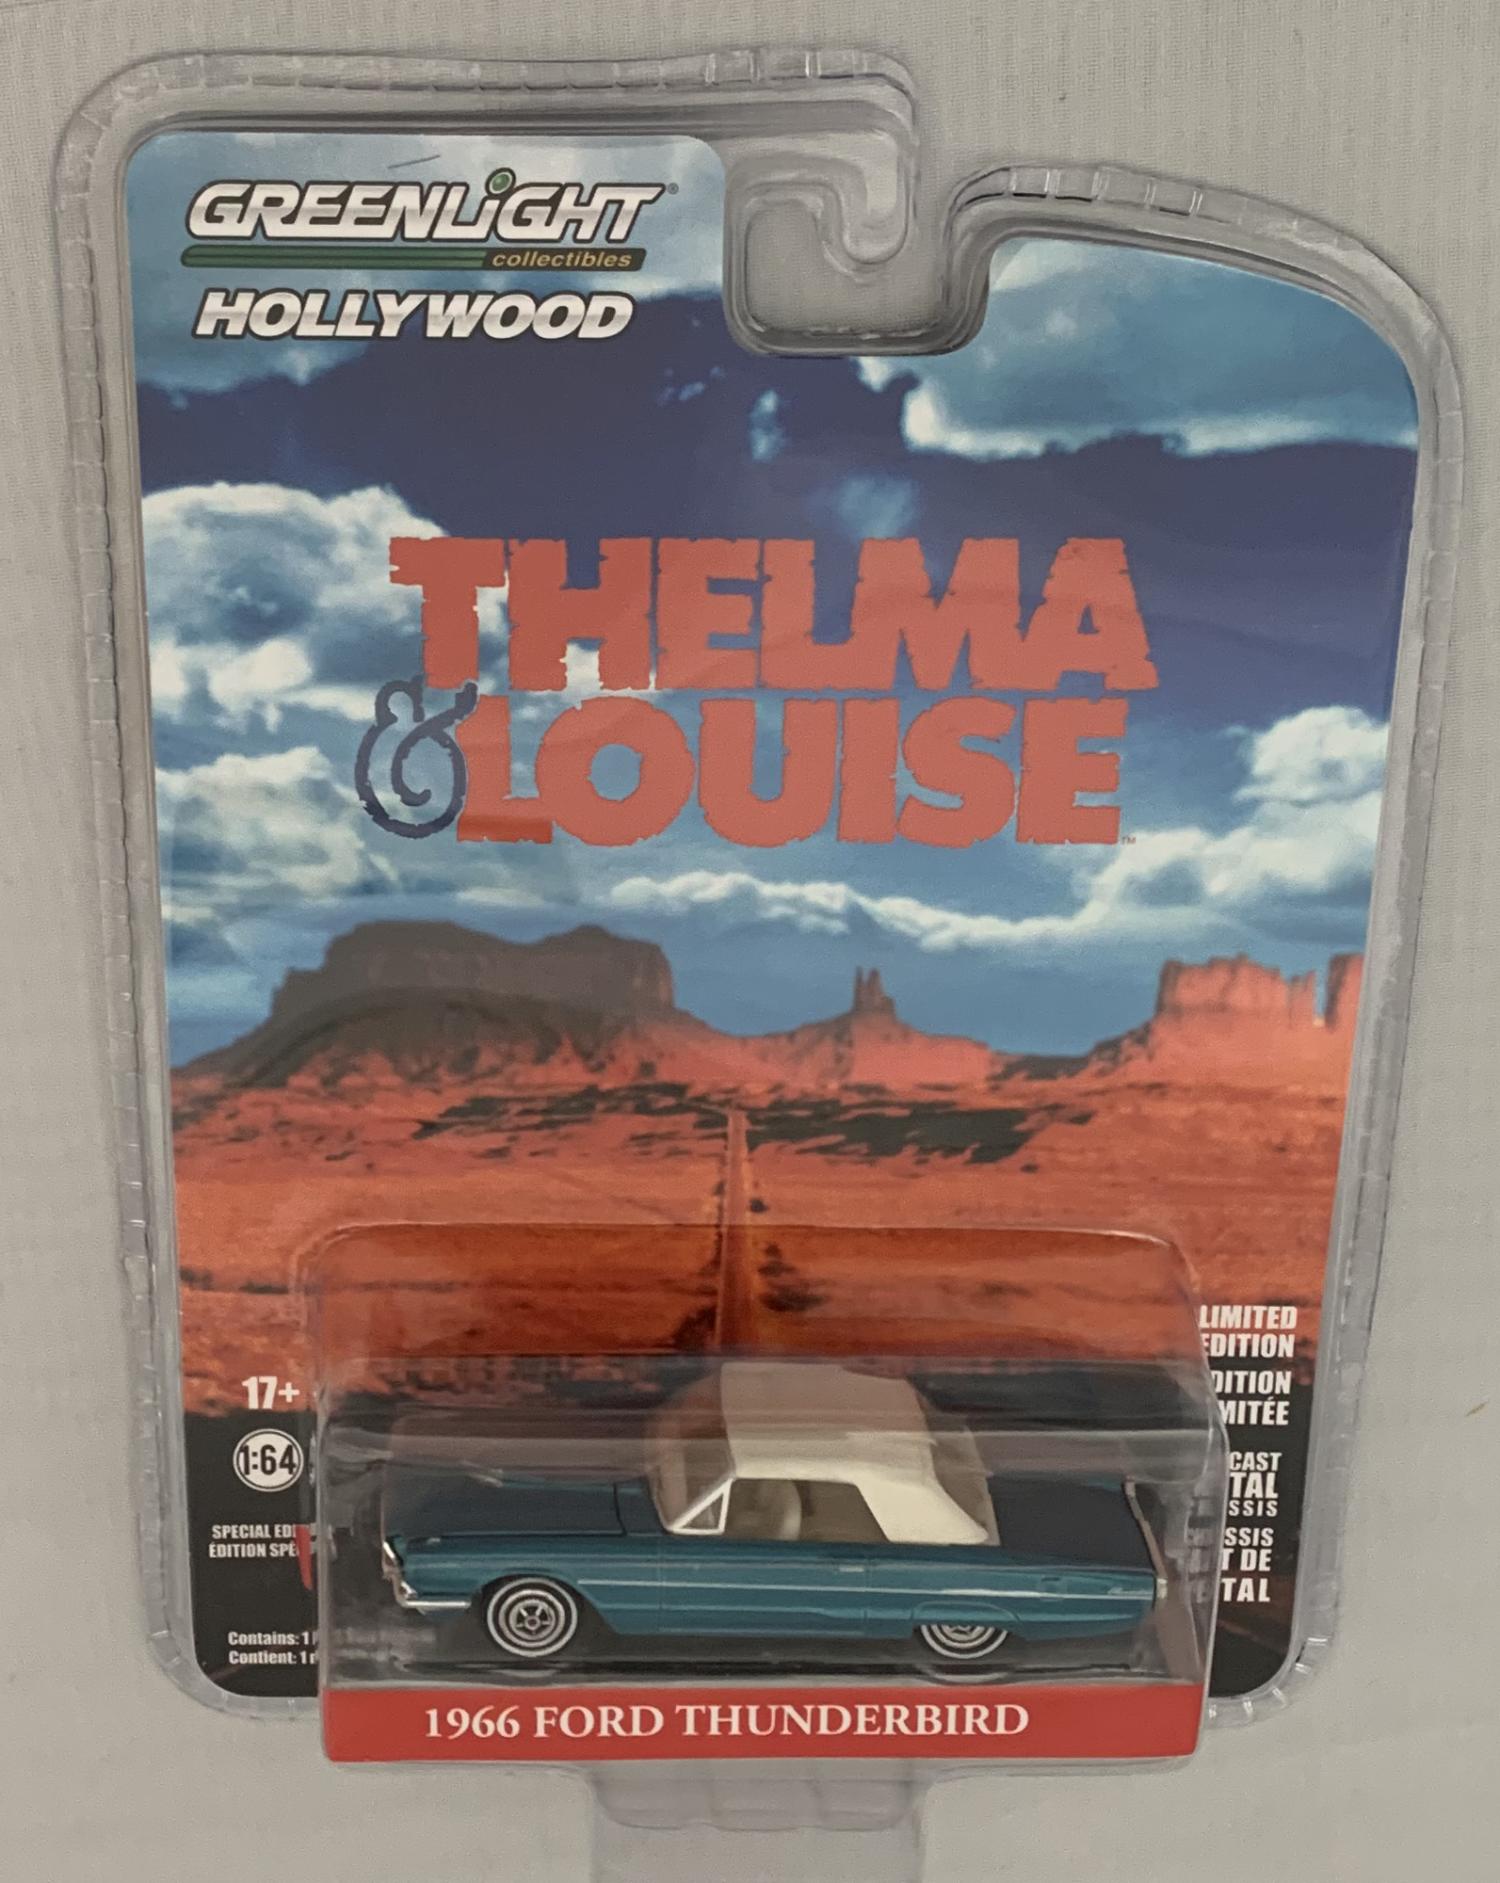 Thelma & Louise 1966 Ford Thunderbird (roof up) in turquoise 1:64 scale model from Greenlight, limited edition